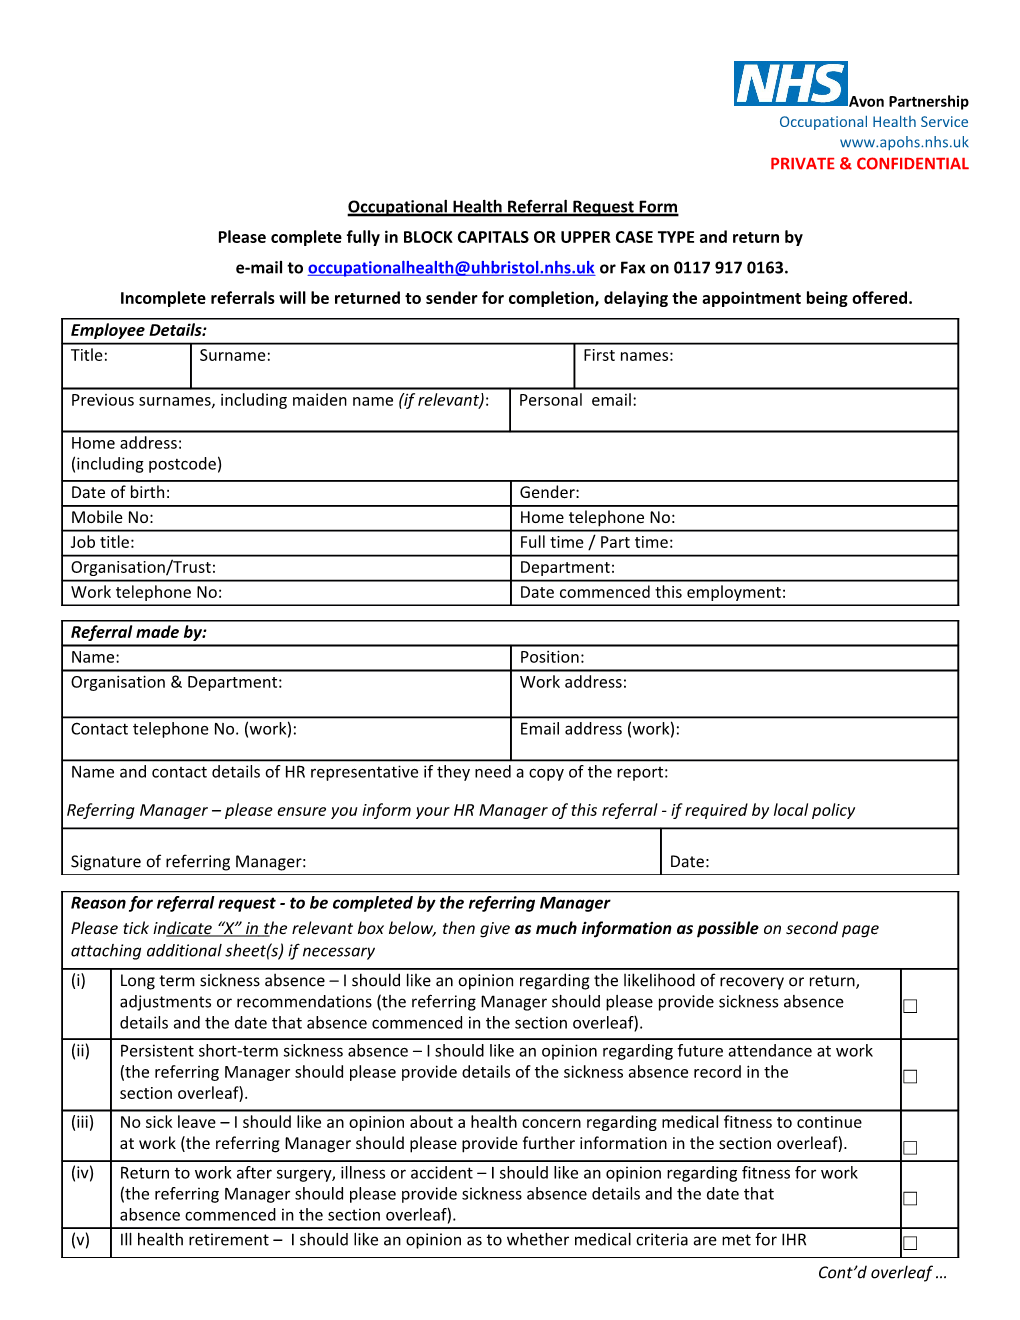 OH Referral Form-Revised 1208